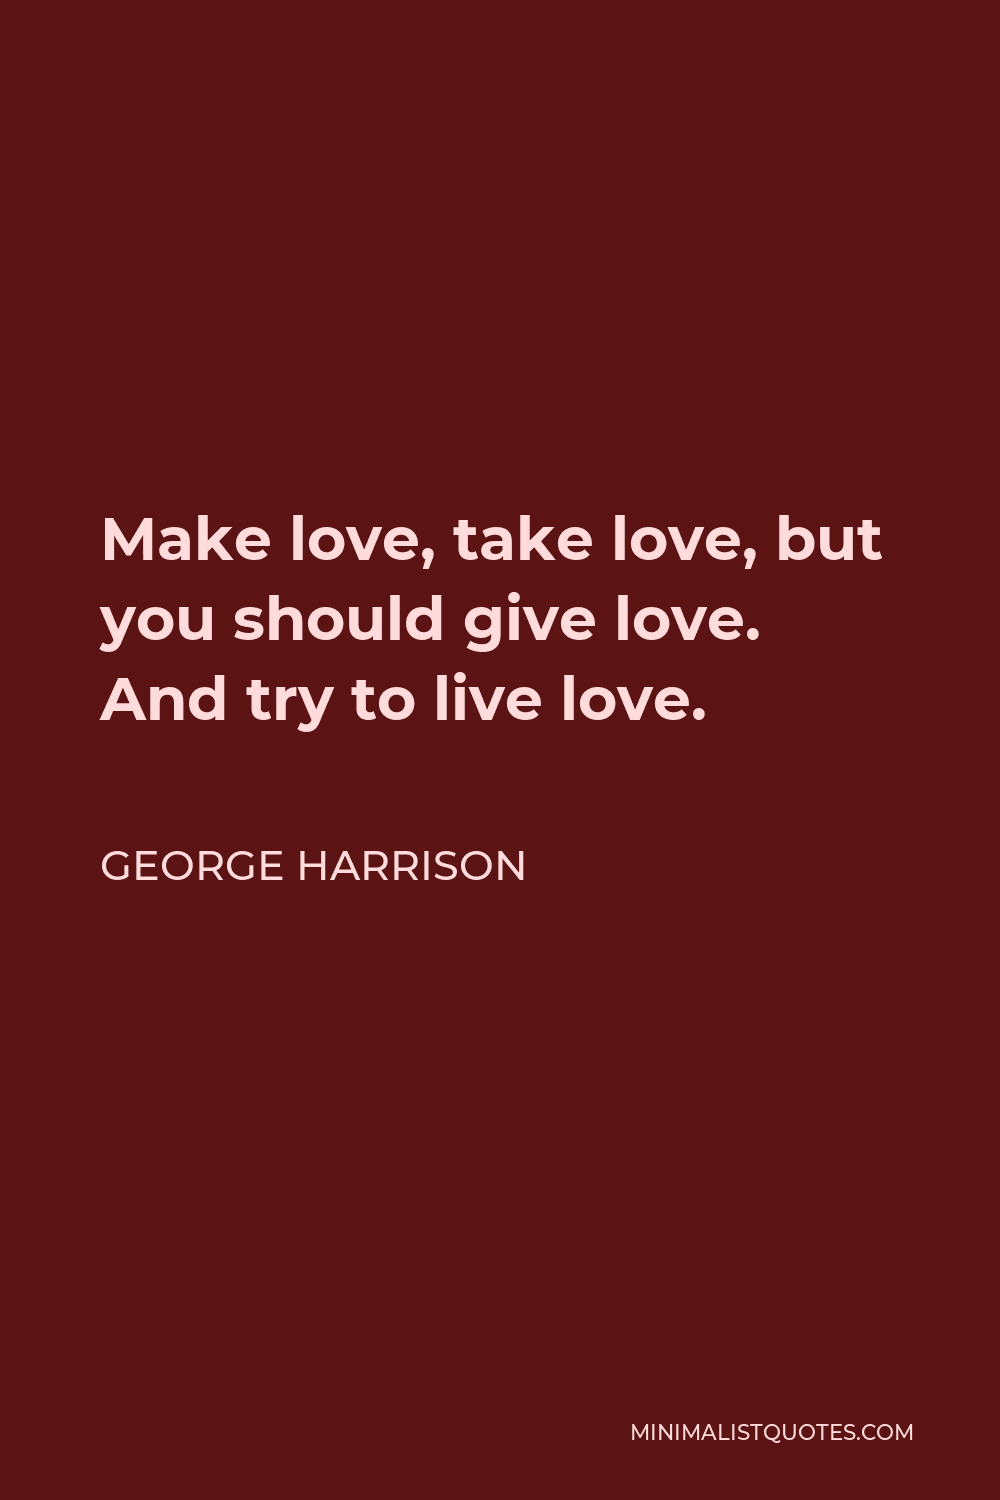 George Harrison Quote: Make love, take love, but you should give love. And  try to live love.